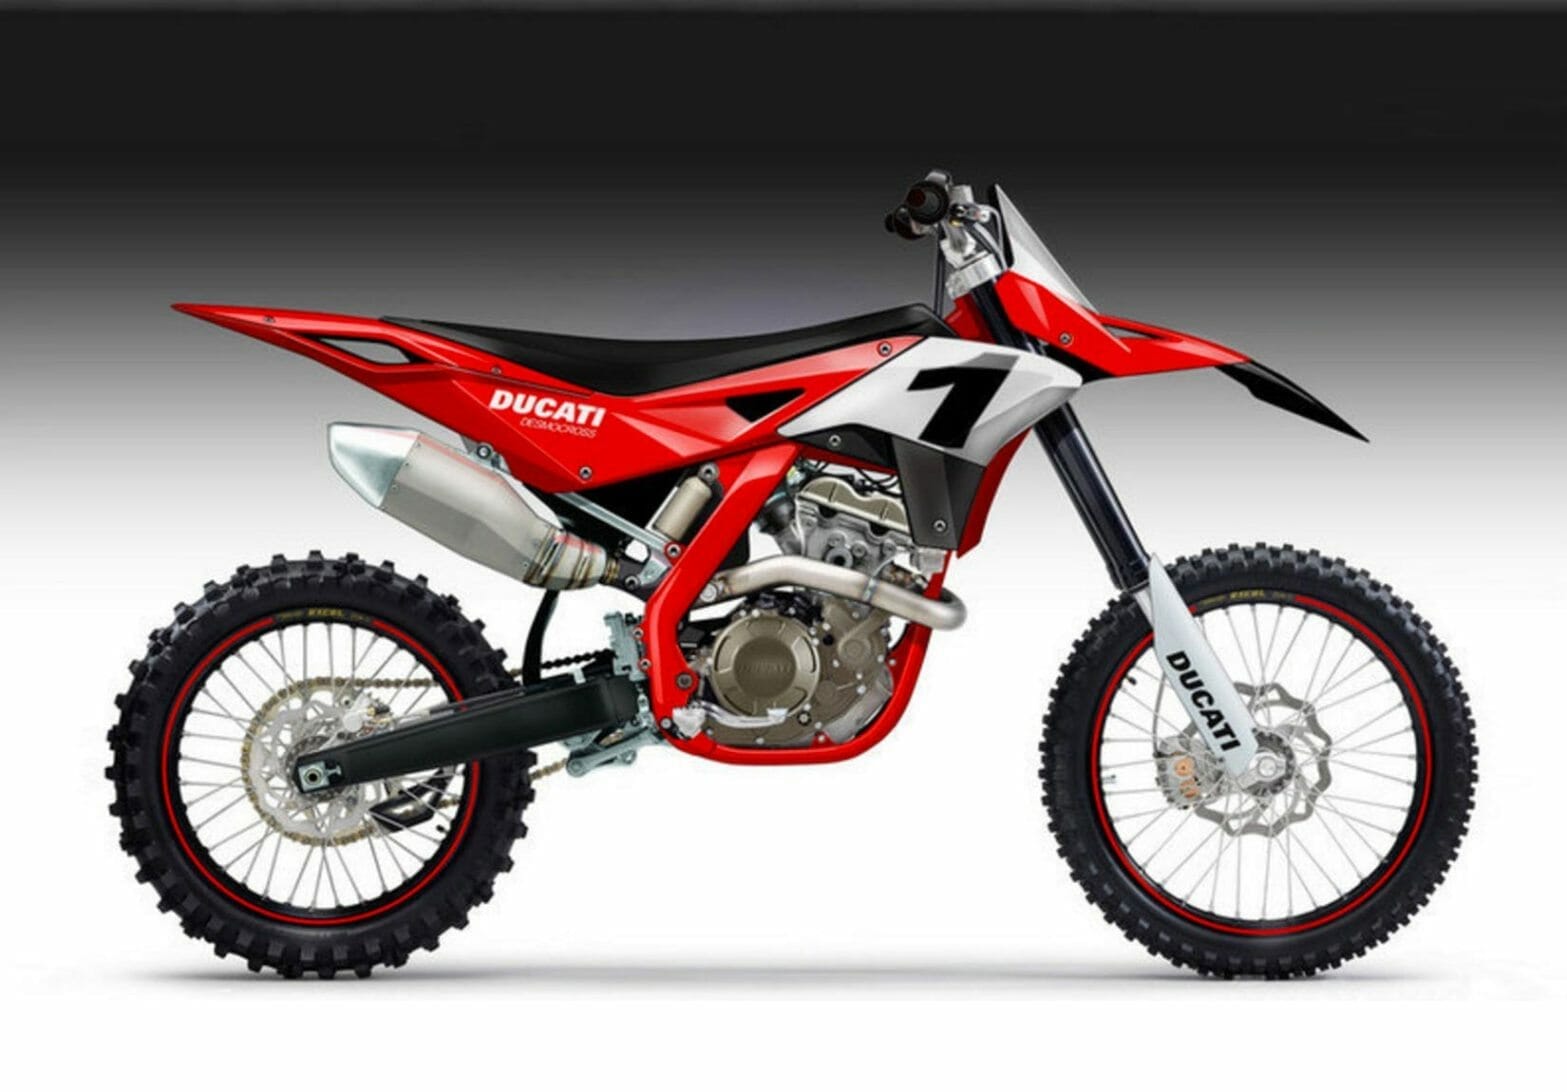 Does an MX machine come from Ducati?